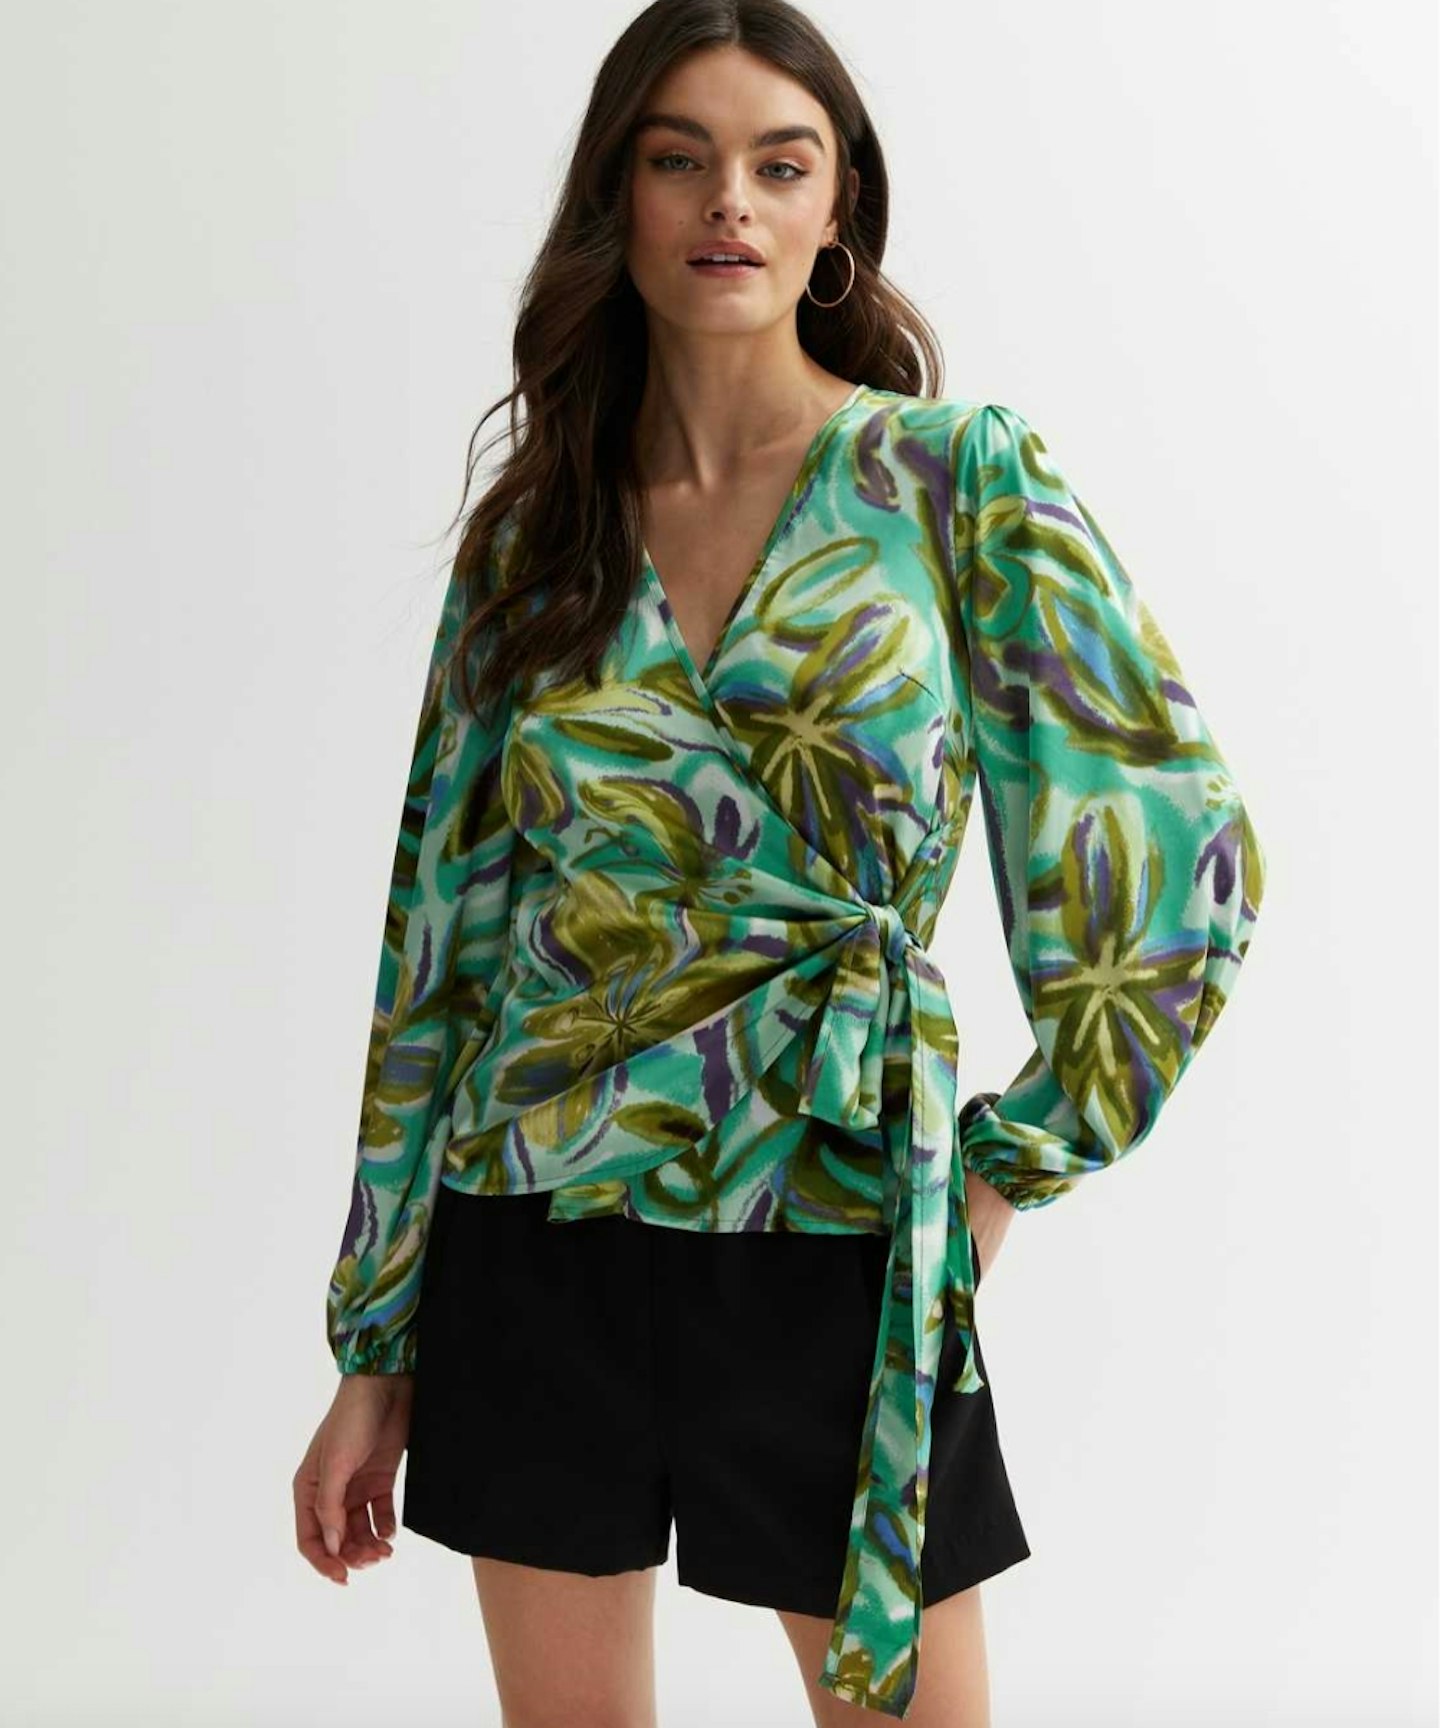 New Look, Gini London Green Floral Satin Puff Sleeve Wrap Blouse